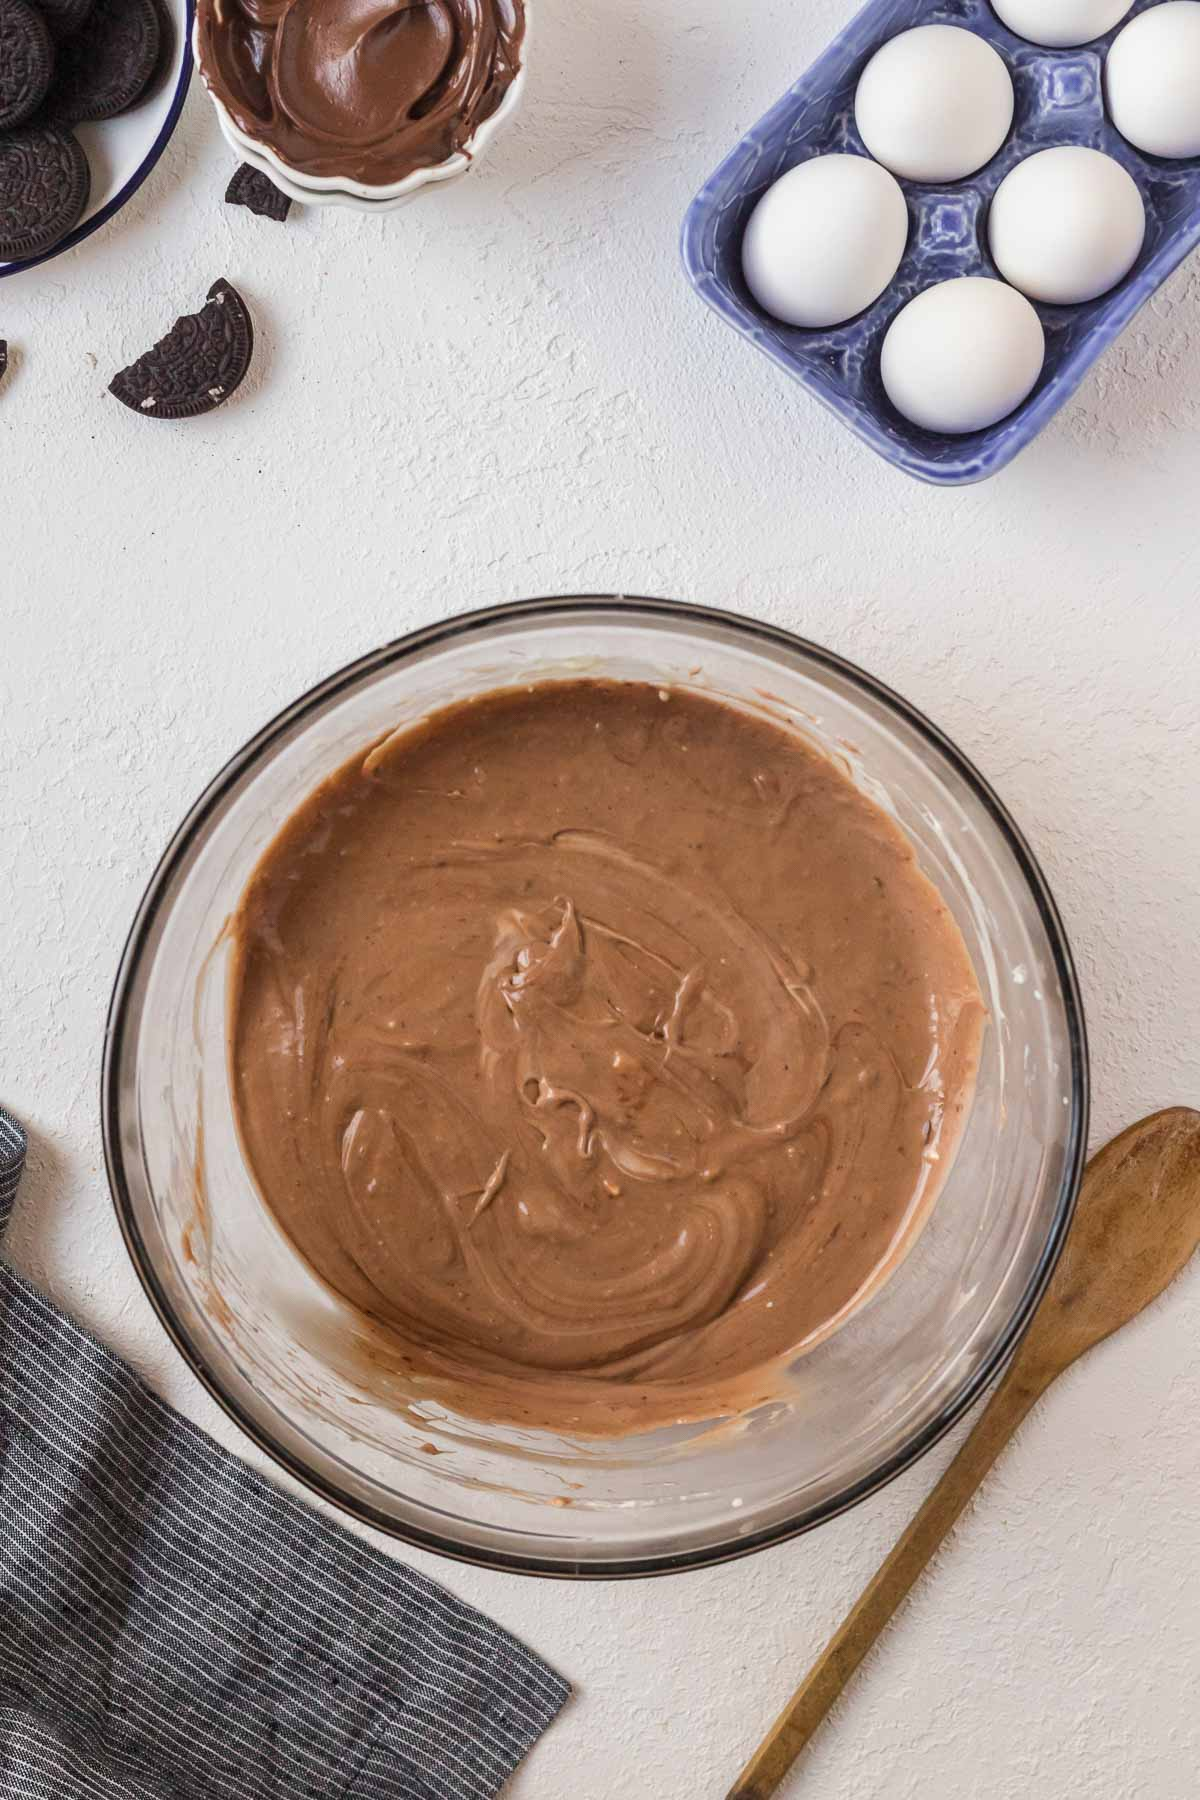 Nutella cheesecake batter in bowl